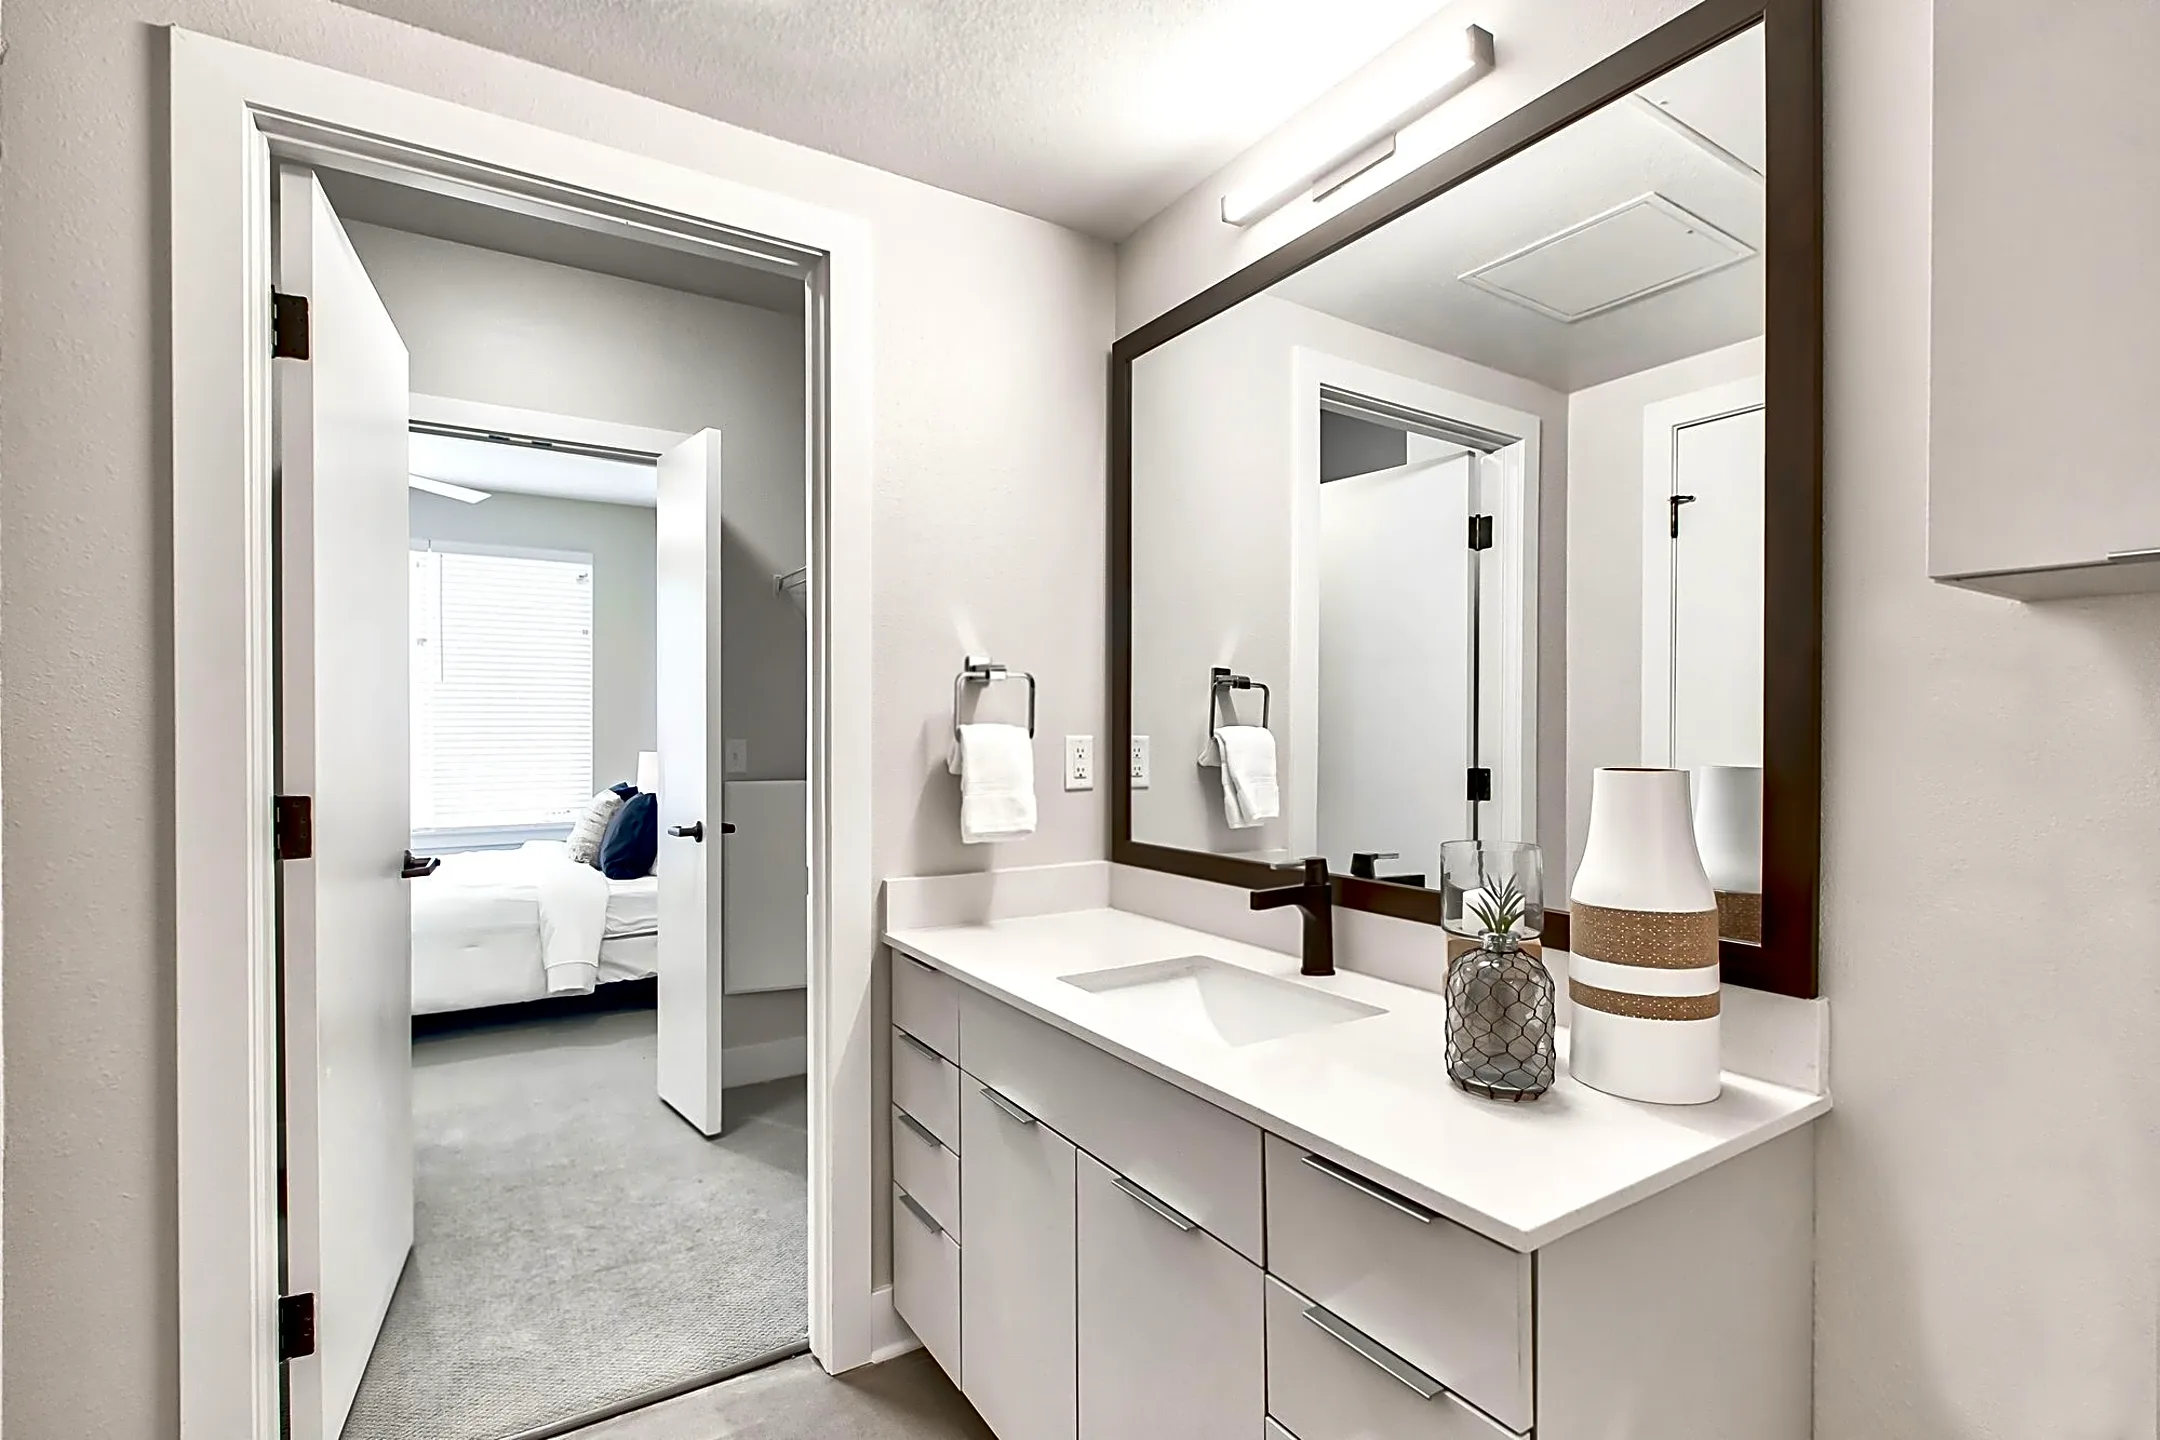 Bathroom - Ascent Apartments - Westminster, CO